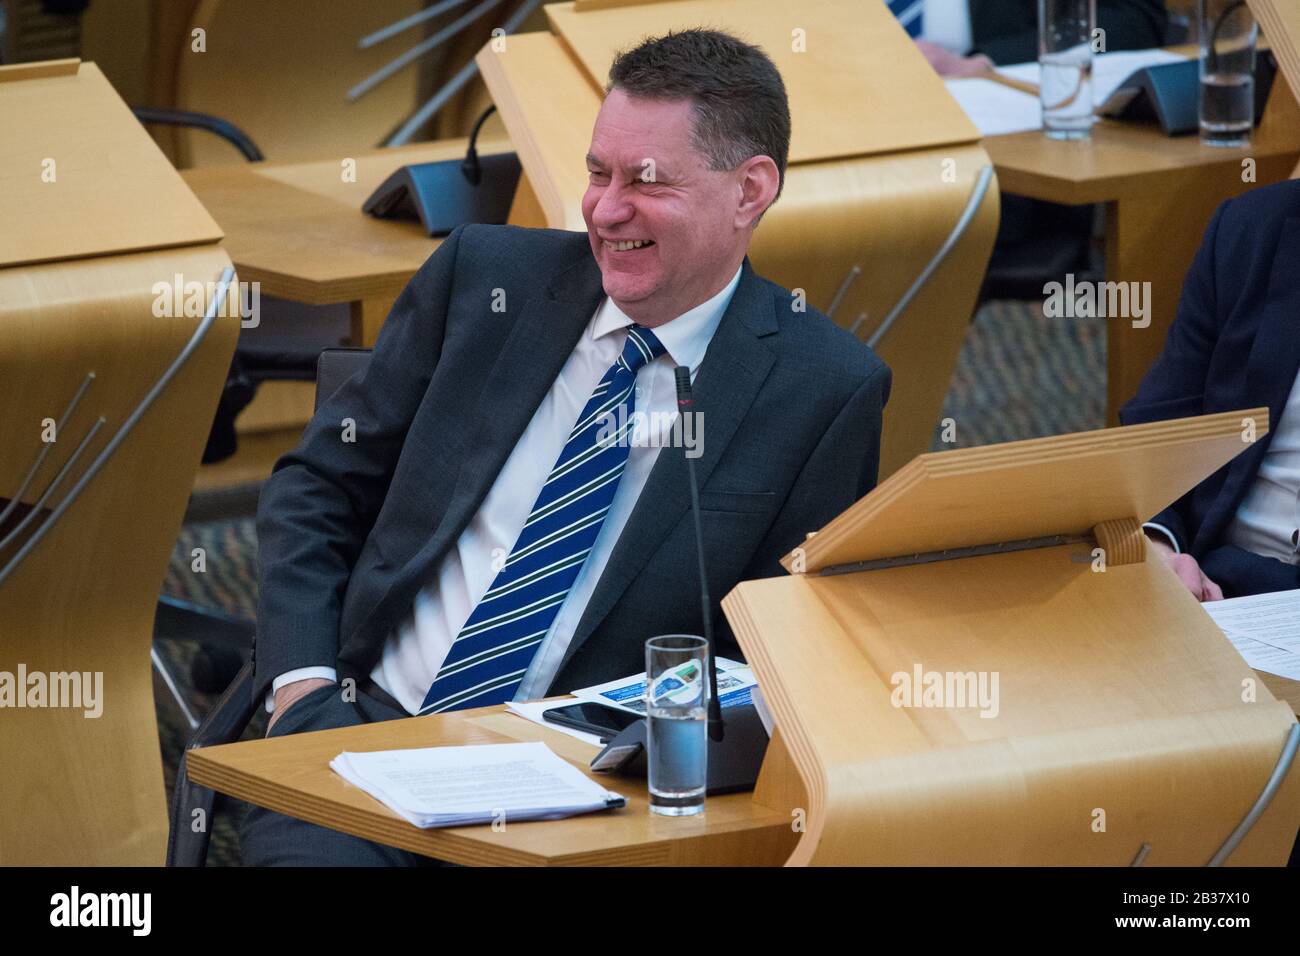 Edinburgh, UK. 4th Mar, 2020. Pictured: Murdo Fraser MSP - Shadow Cabinet Secretary for the Constitution and External Affairs for the Scottish Conservative and Unionist Party. Scottish Government Debate: Scottish Rate Resolution Scenes inside the debating chamber of the Scottish Parliament. Credit: Colin Fisher/Alamy Live News Credit: Colin Fisher/Alamy Live News Stock Photo